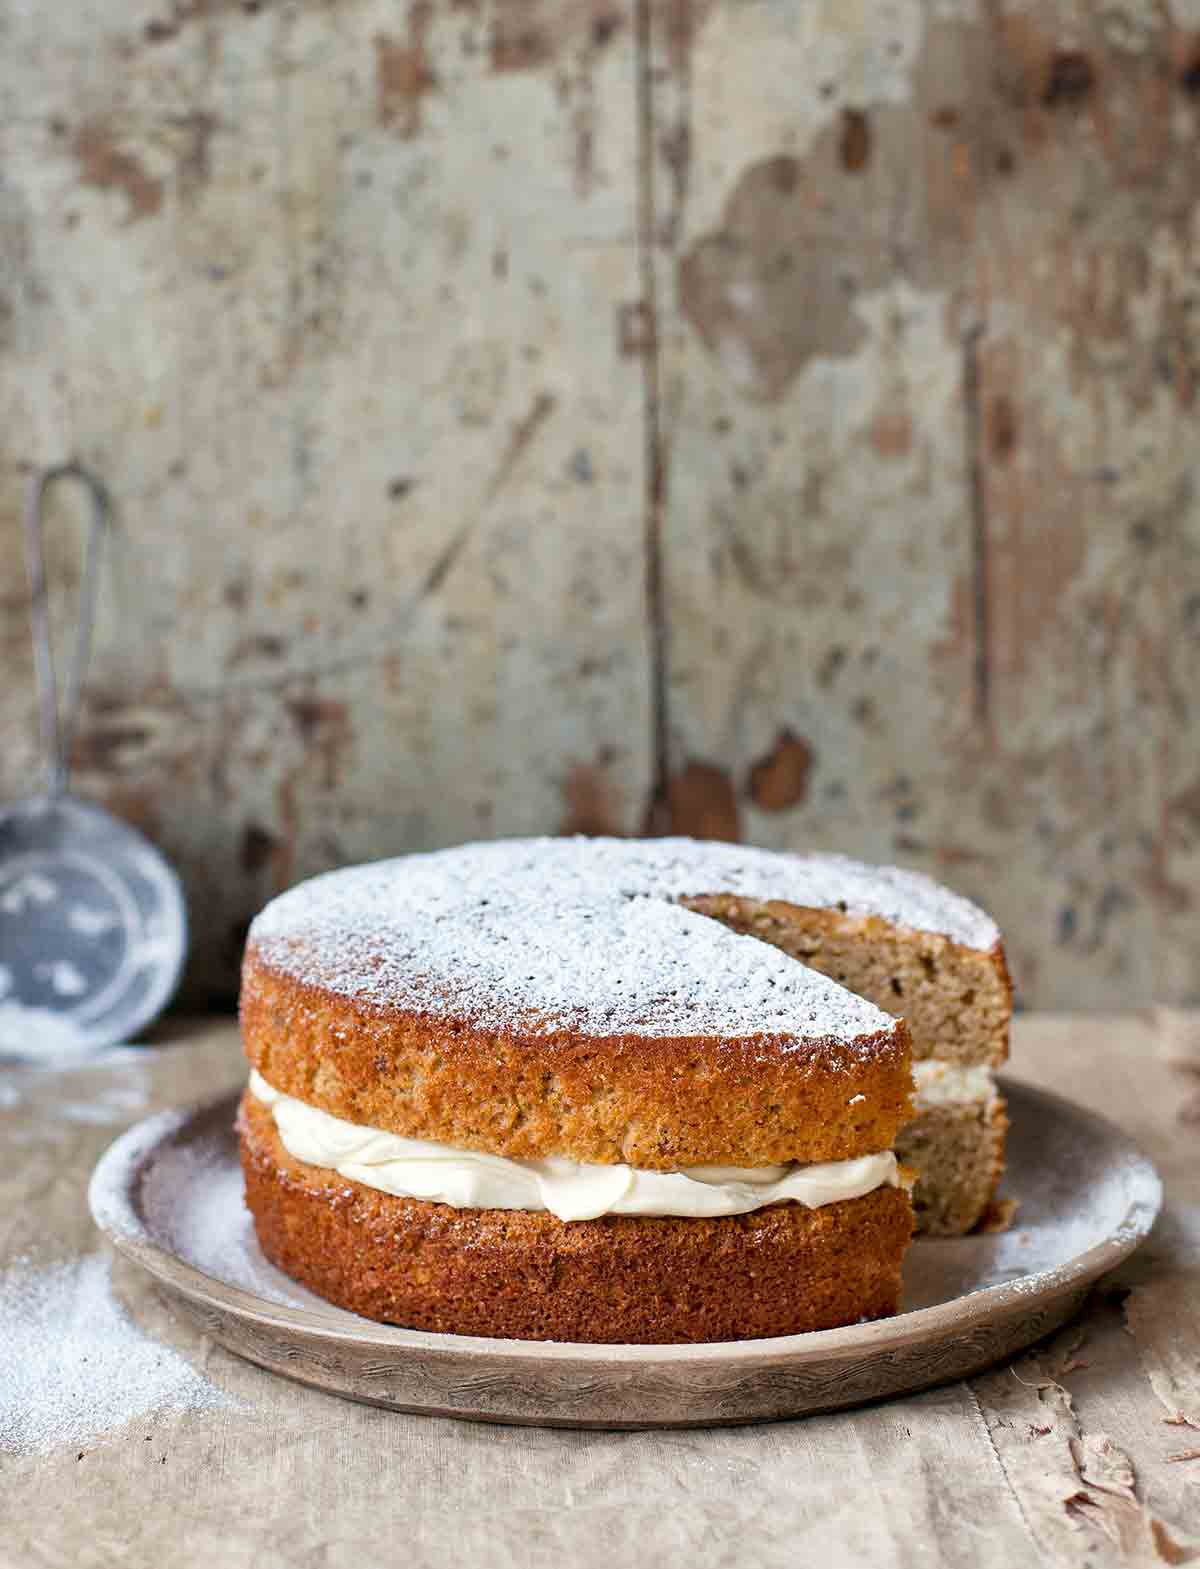 A maple parsnip cake with mascarpone frosting between the layers on a grey plate.